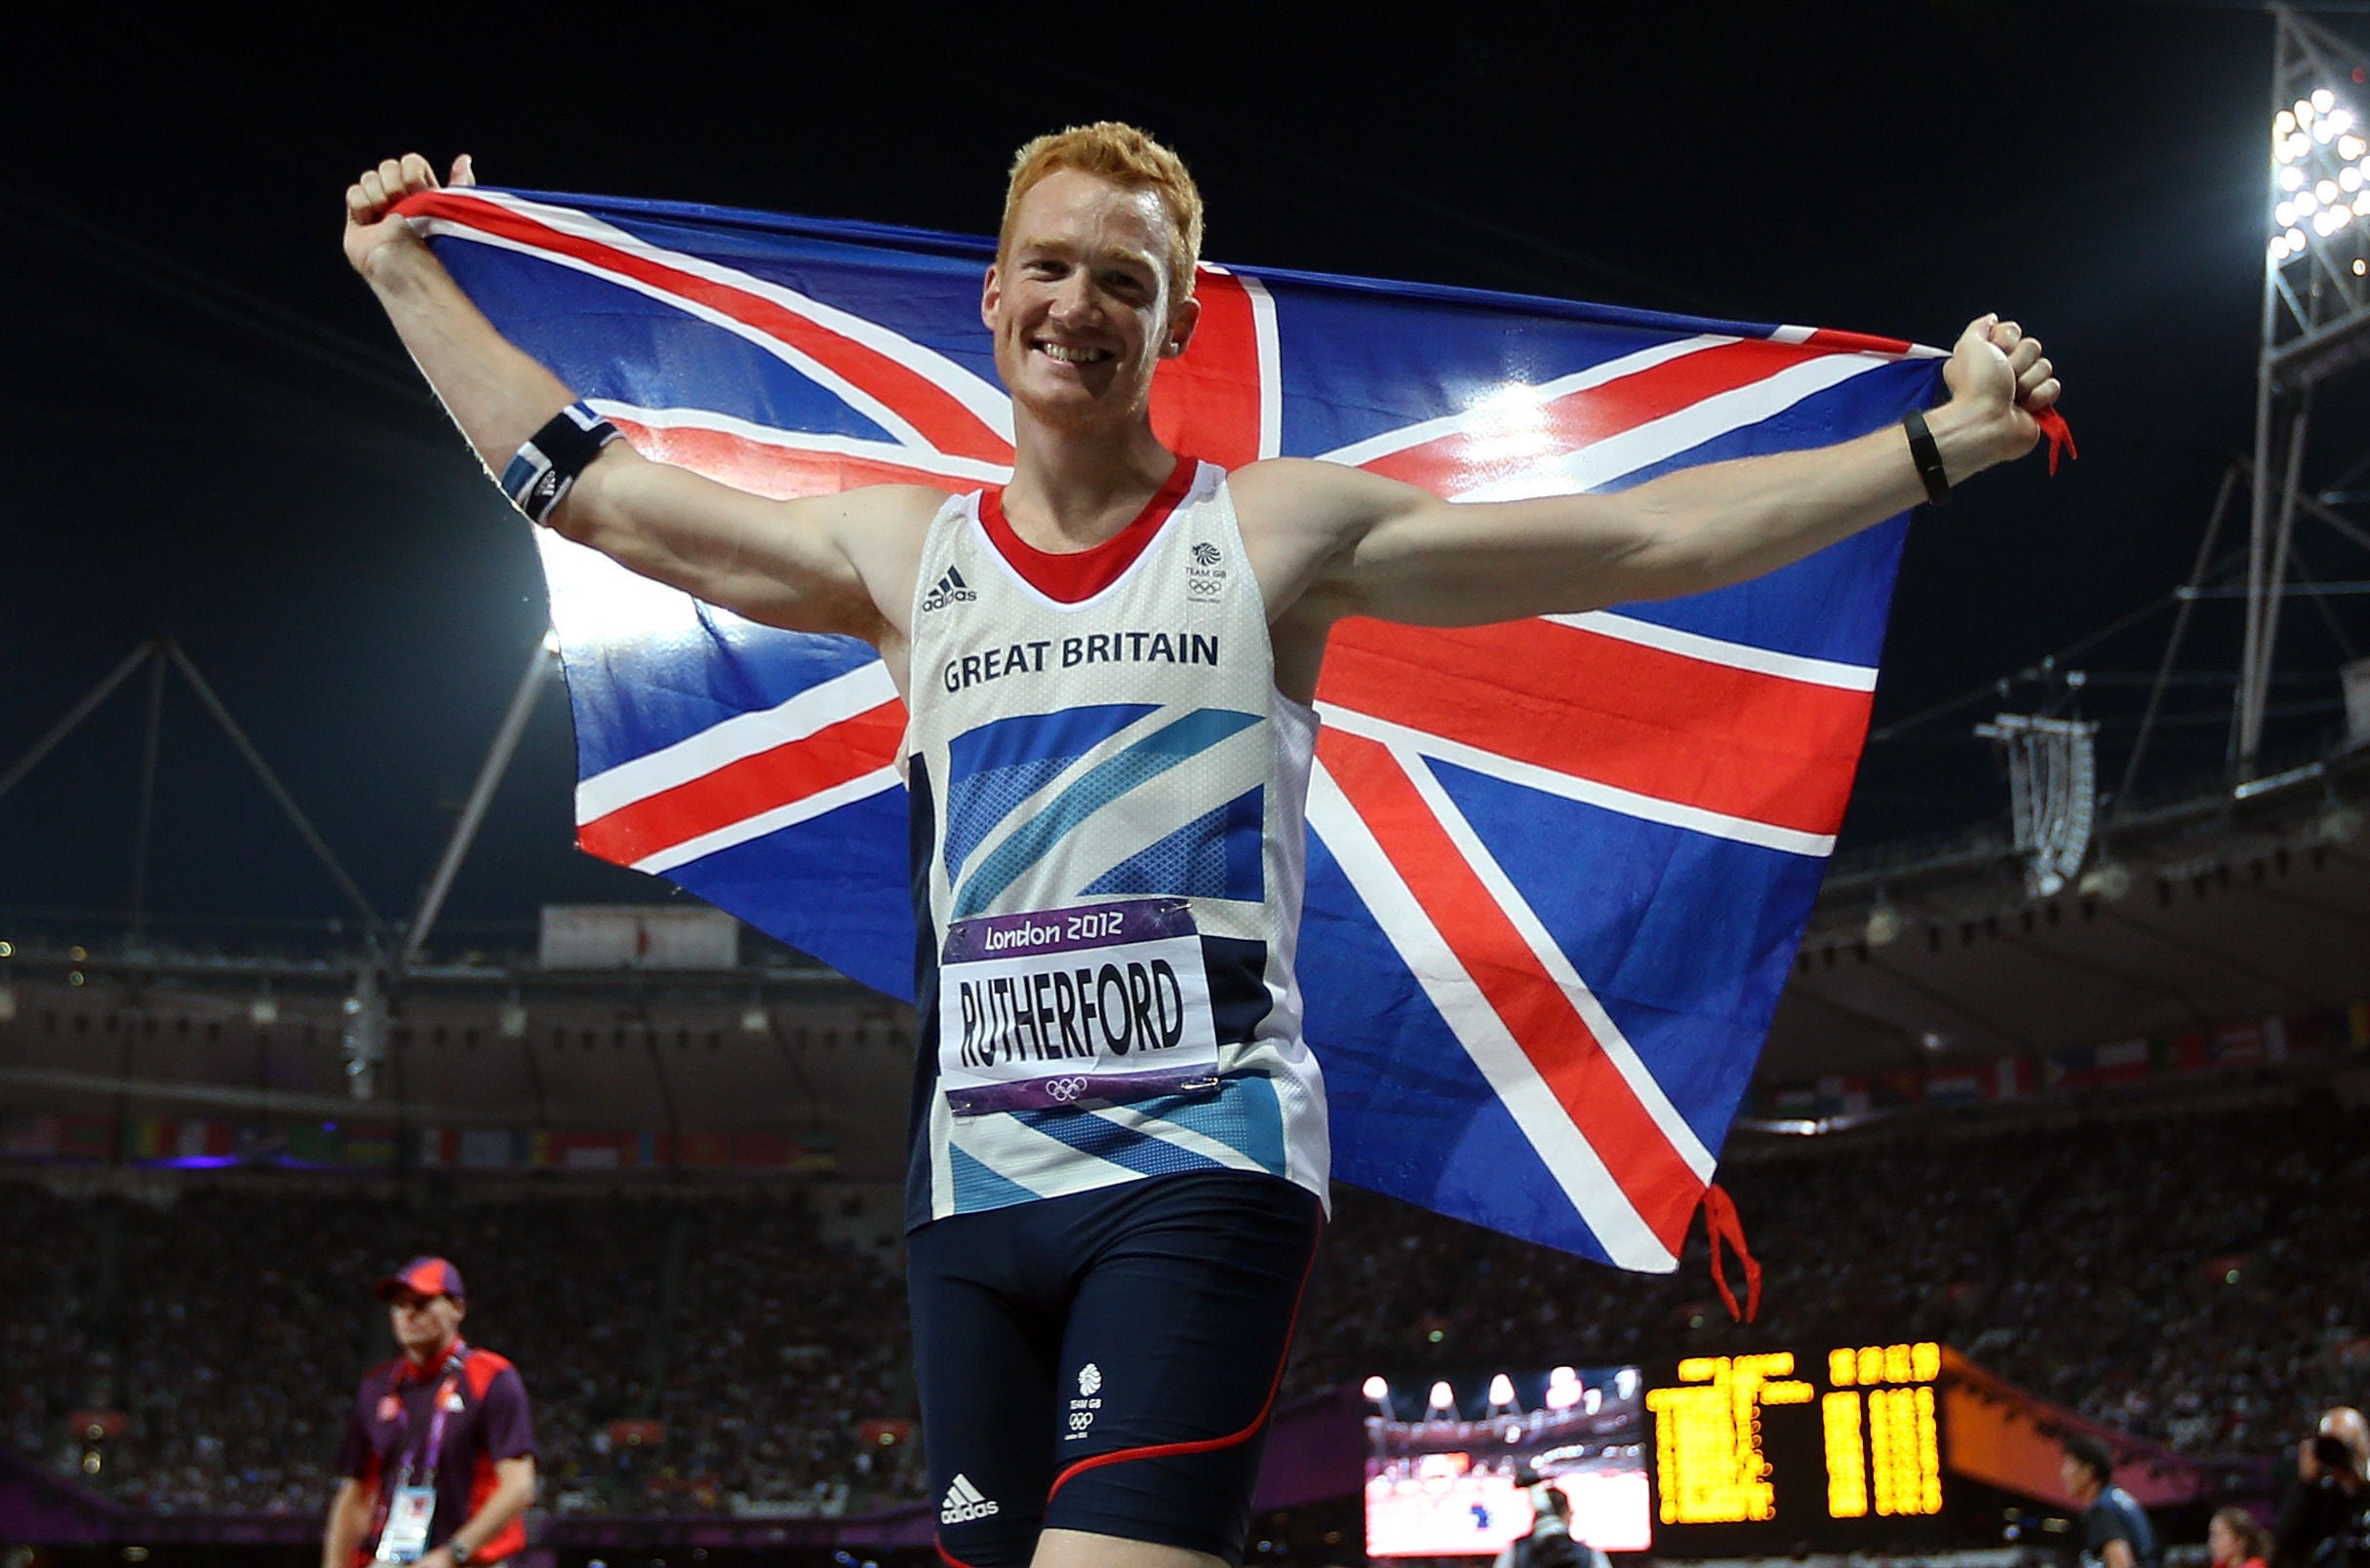 Greg Rutherford was inspired by the home crowd at London 2012